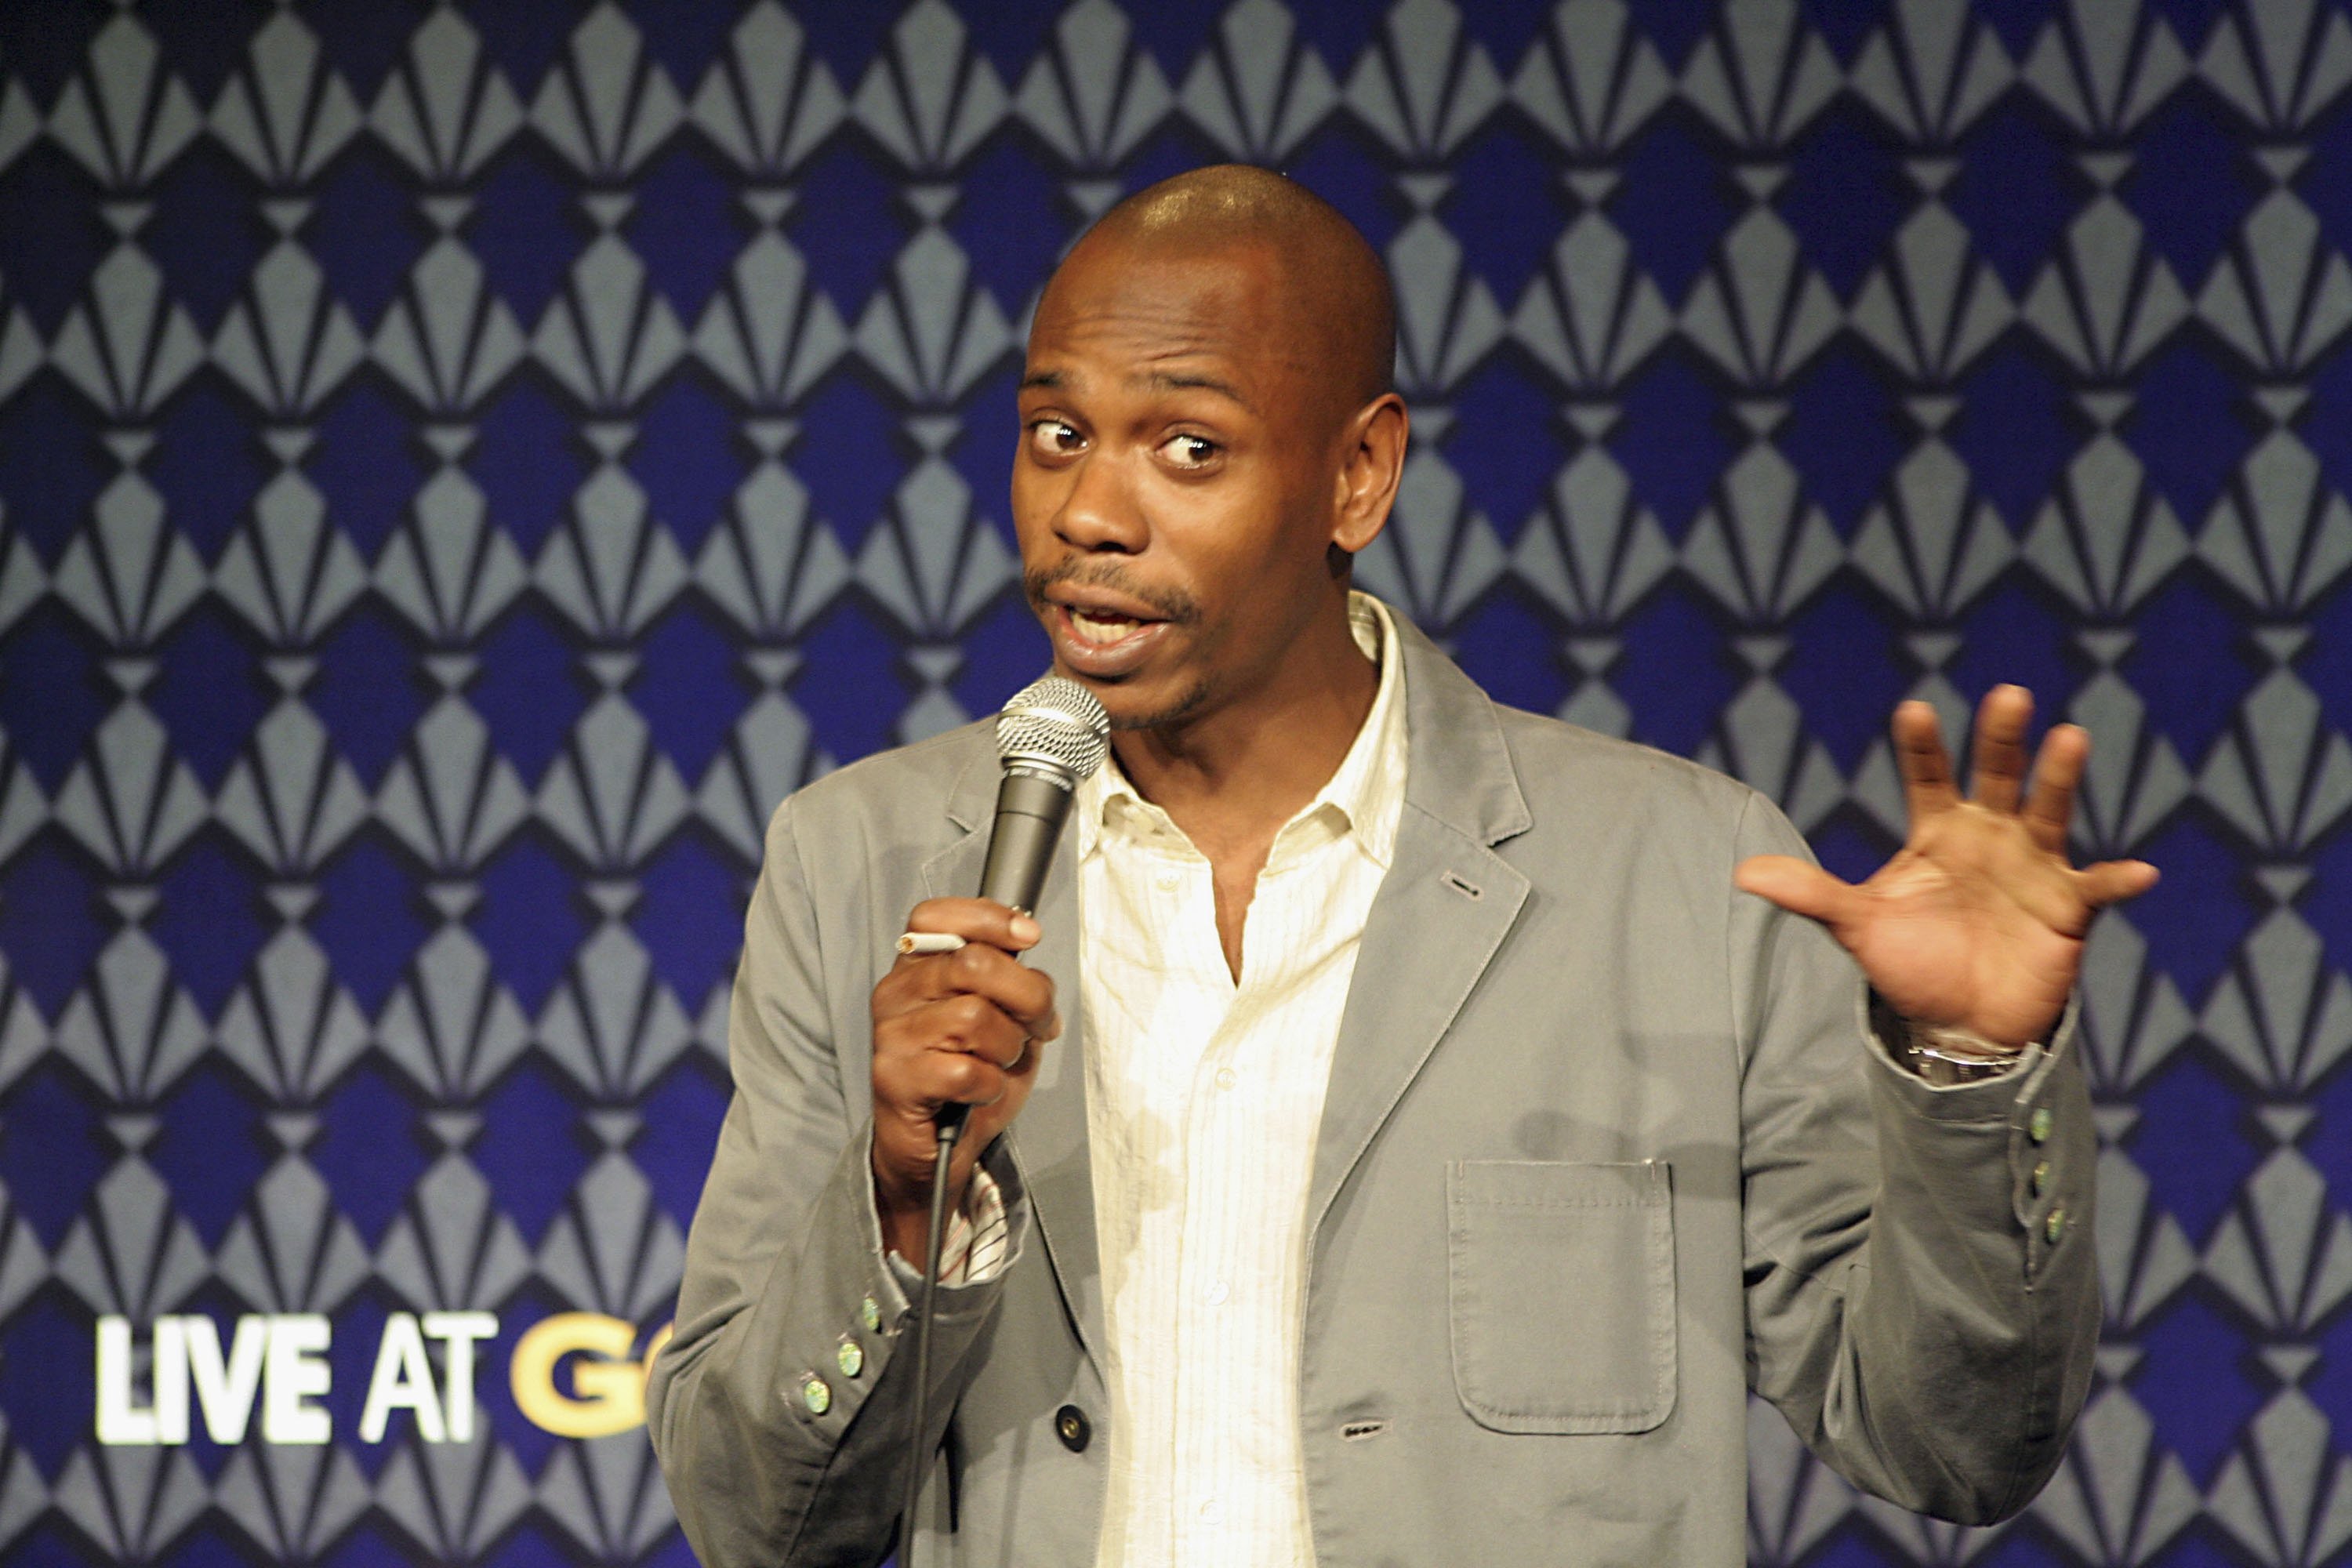 Dave Chappelle at a performance to benefit "Cringe Humor Show" creator Masavia Greer's son, Lil' Moe at Gotham Comedy Club in 2006 in New York. | Source: Getty Images